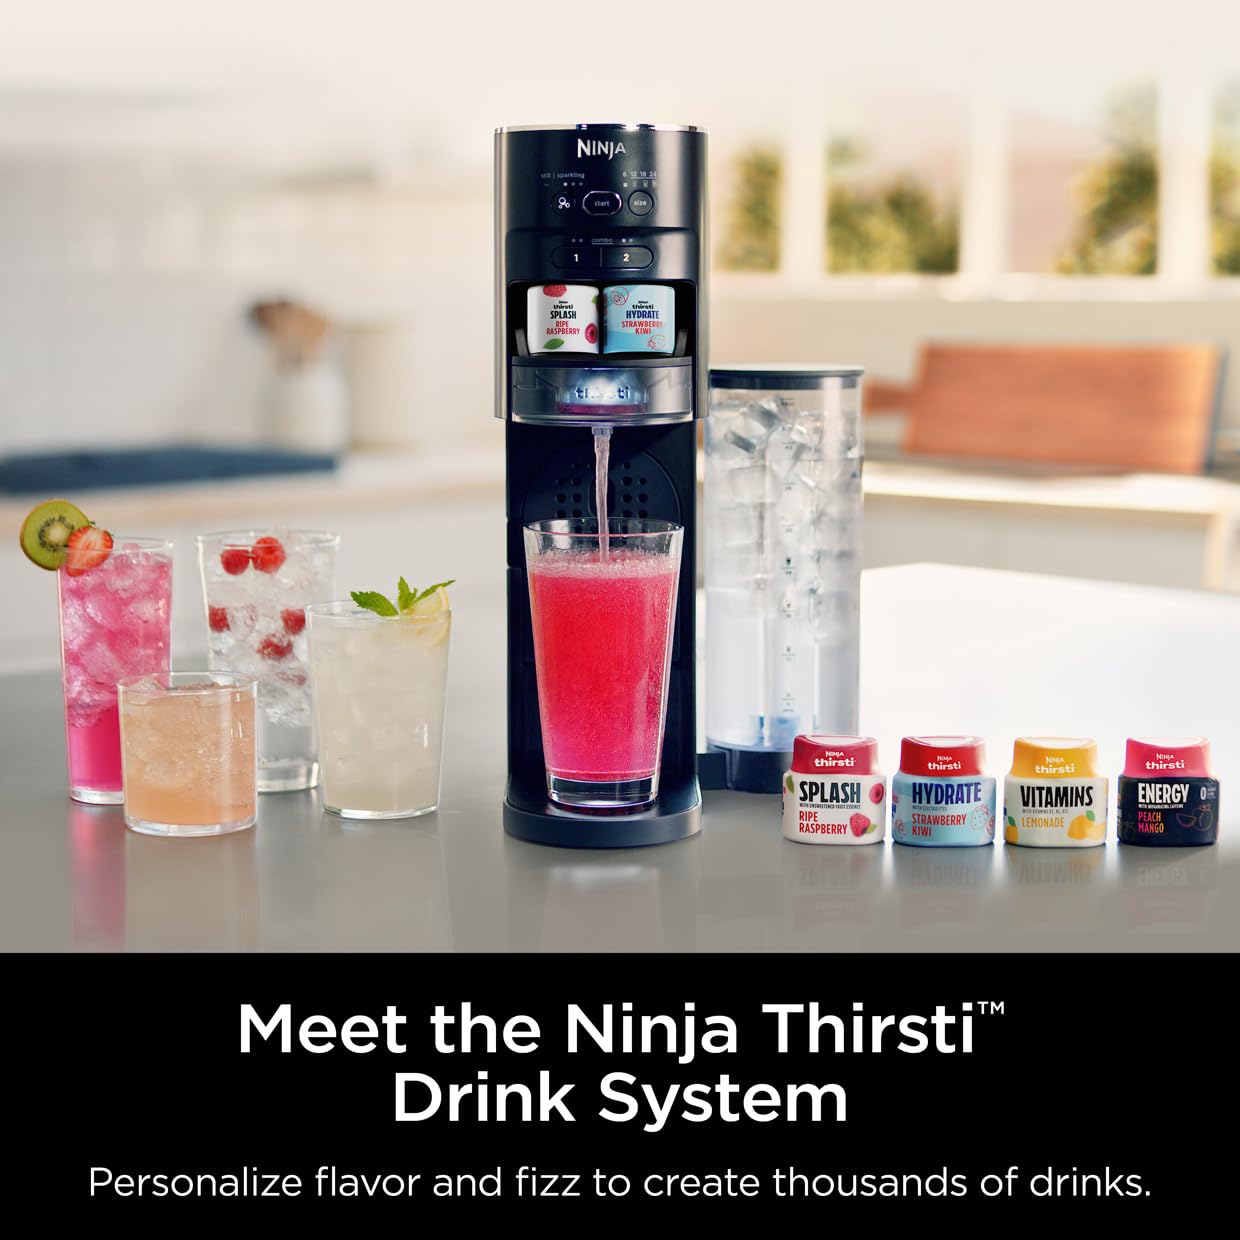 Ninja Thirsti Drink System, Soda Maker, Create Unique Sparkling & Still Drinks, Personalize Size & Flavor, Carbonated Water Machine, 60L CO2 Cylinder & Variety of Flavored Water Drops, Black WC1001